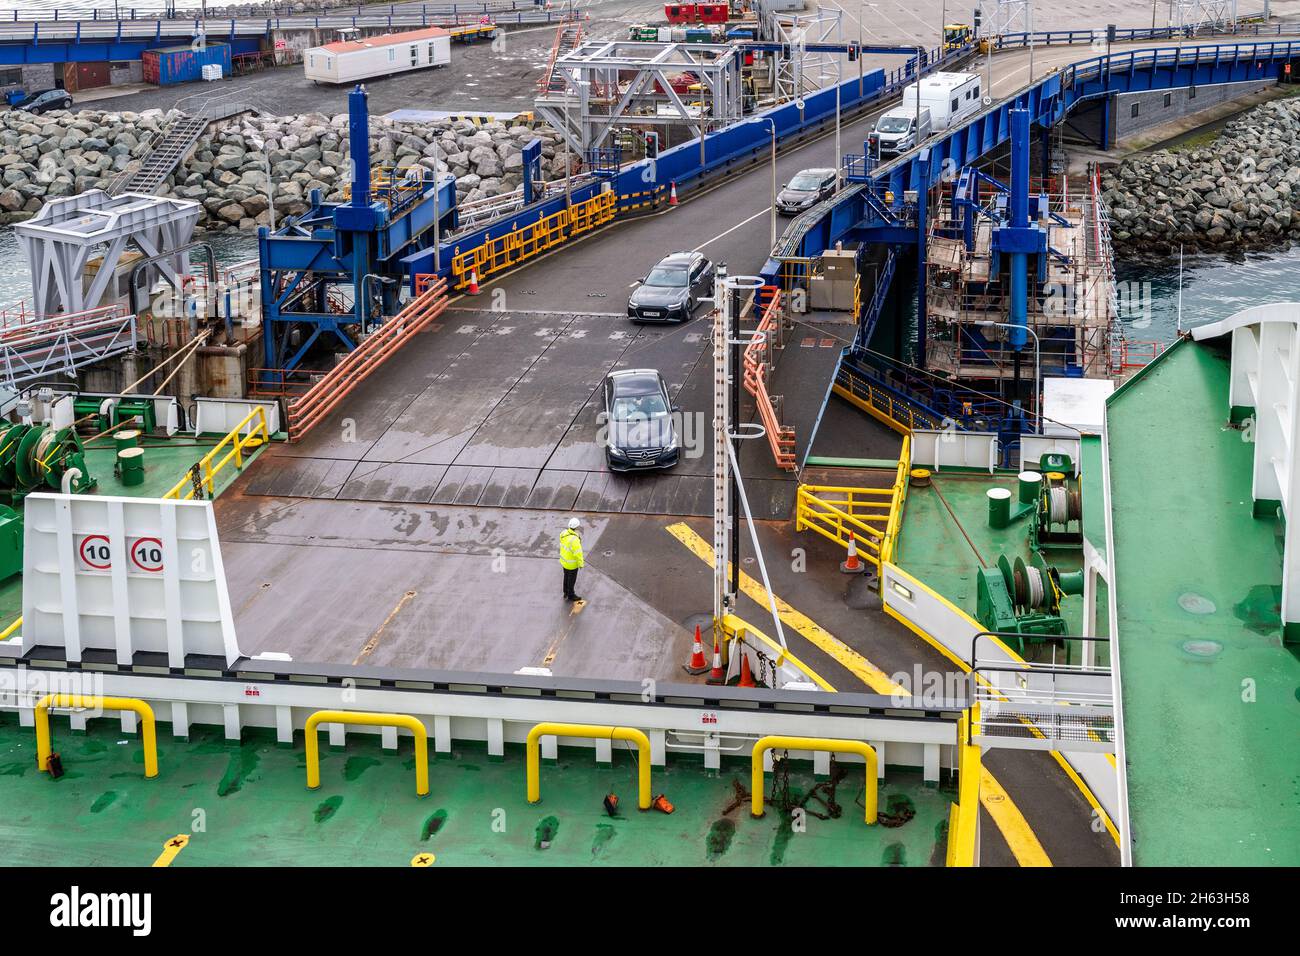 Vehicles loading onto car ferry 'Ulysses' at the Port of Holyhead, North Wales, UK. Stock Photo